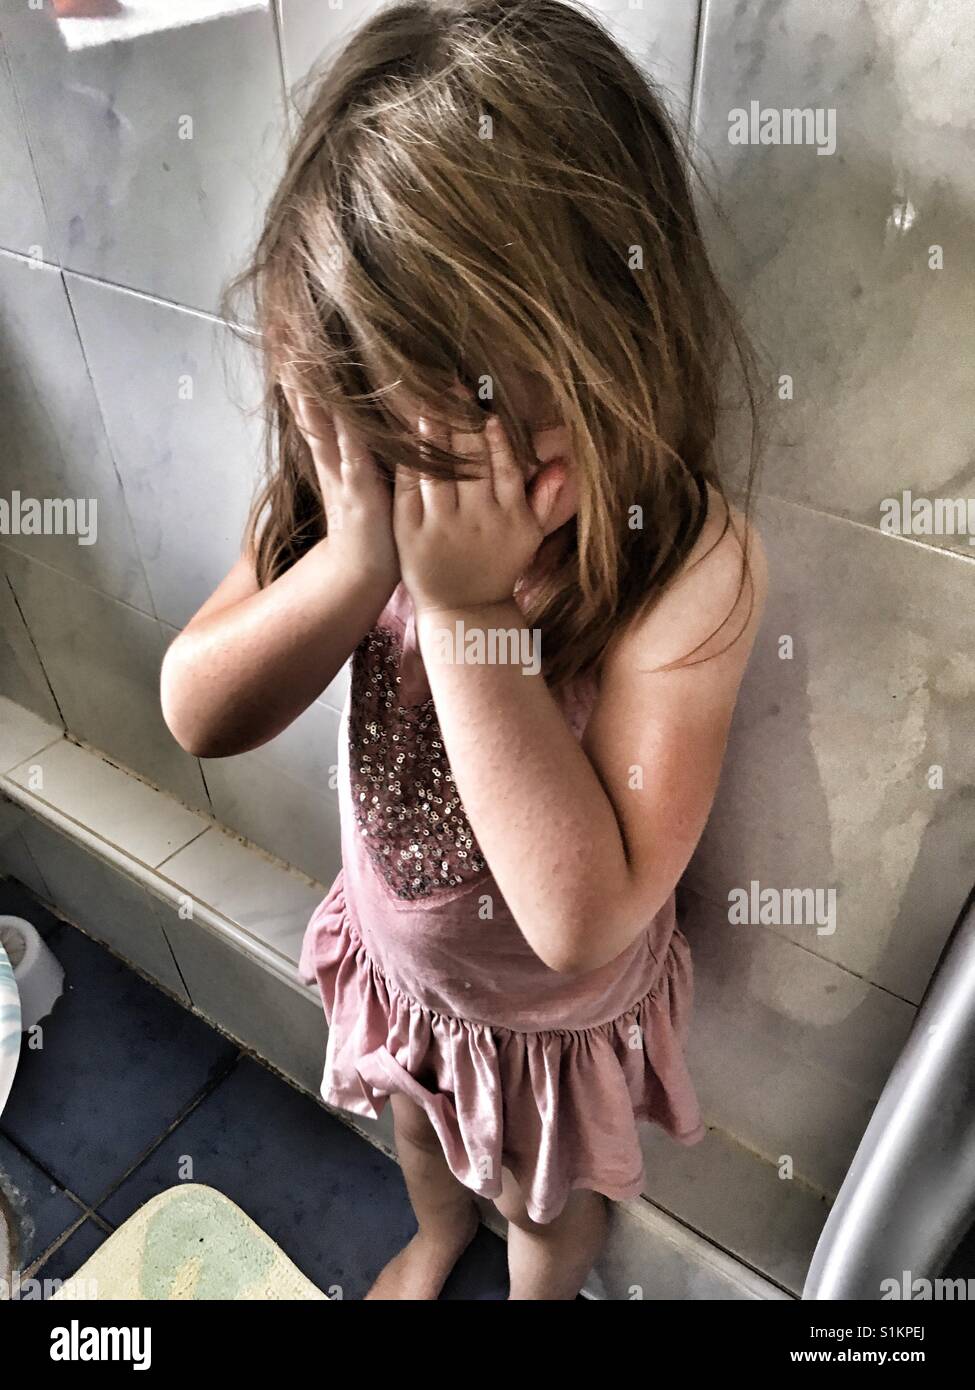 Girl crying with her hands covering her face. Stock Photo